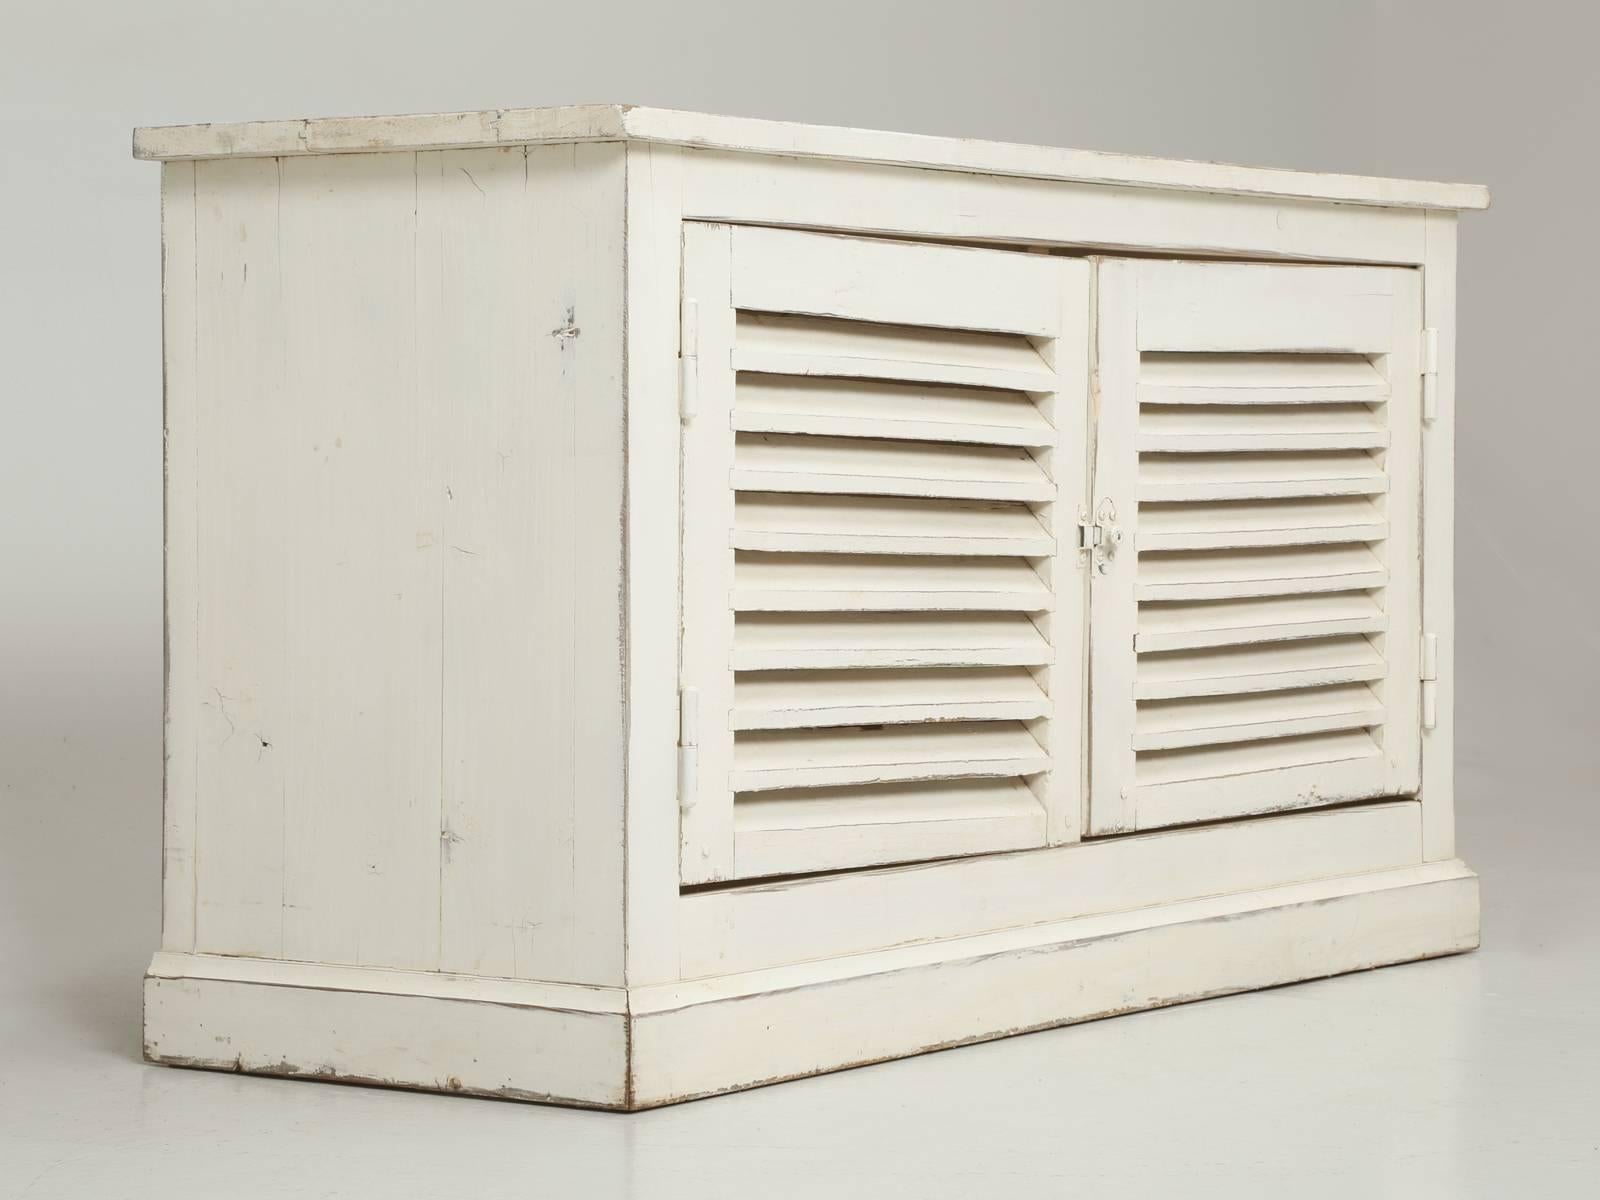 Country French Louvered low Cabinet, that we found along the Route de Fougères in Northern France. Our opinion is, that someone had some old shutters laying around and wanted to make a country French style low Buffet, which would be ideal to place a